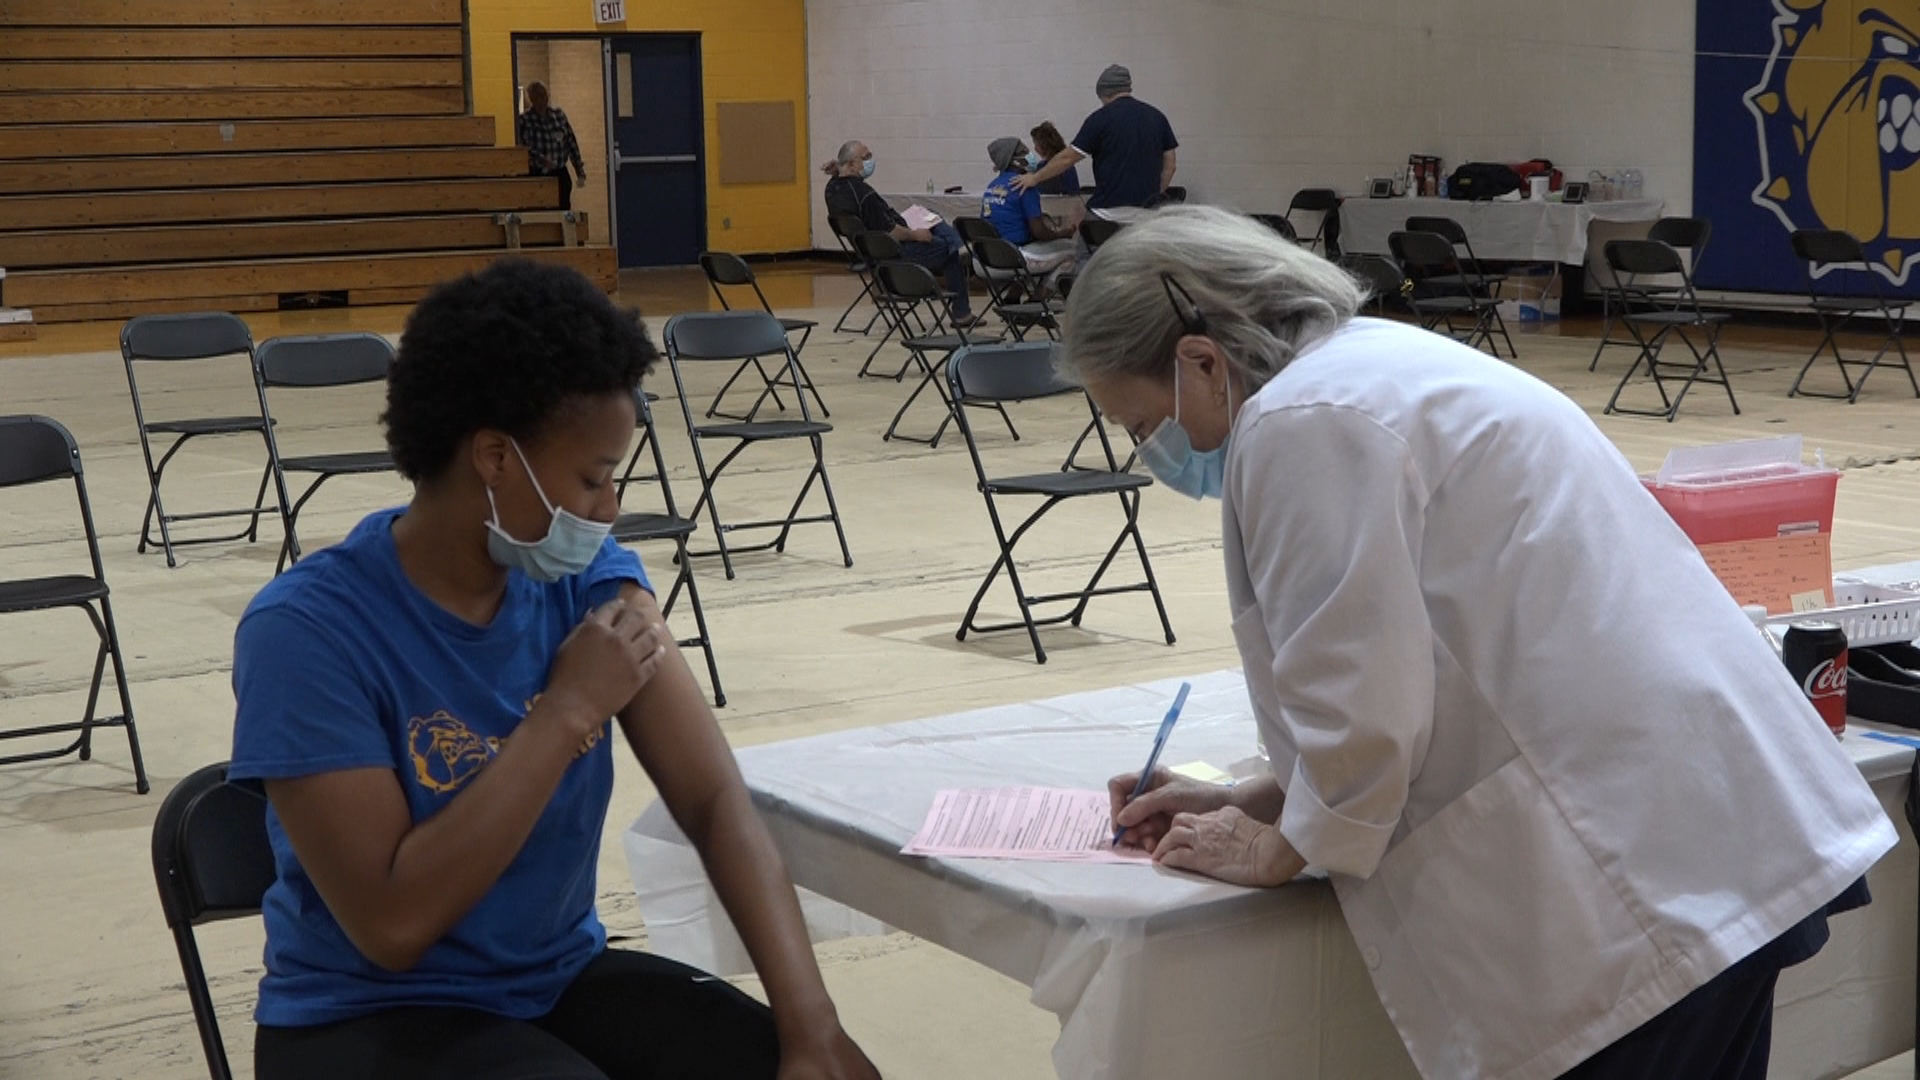 Jarvis Christian College is considering mandating vaccinations.